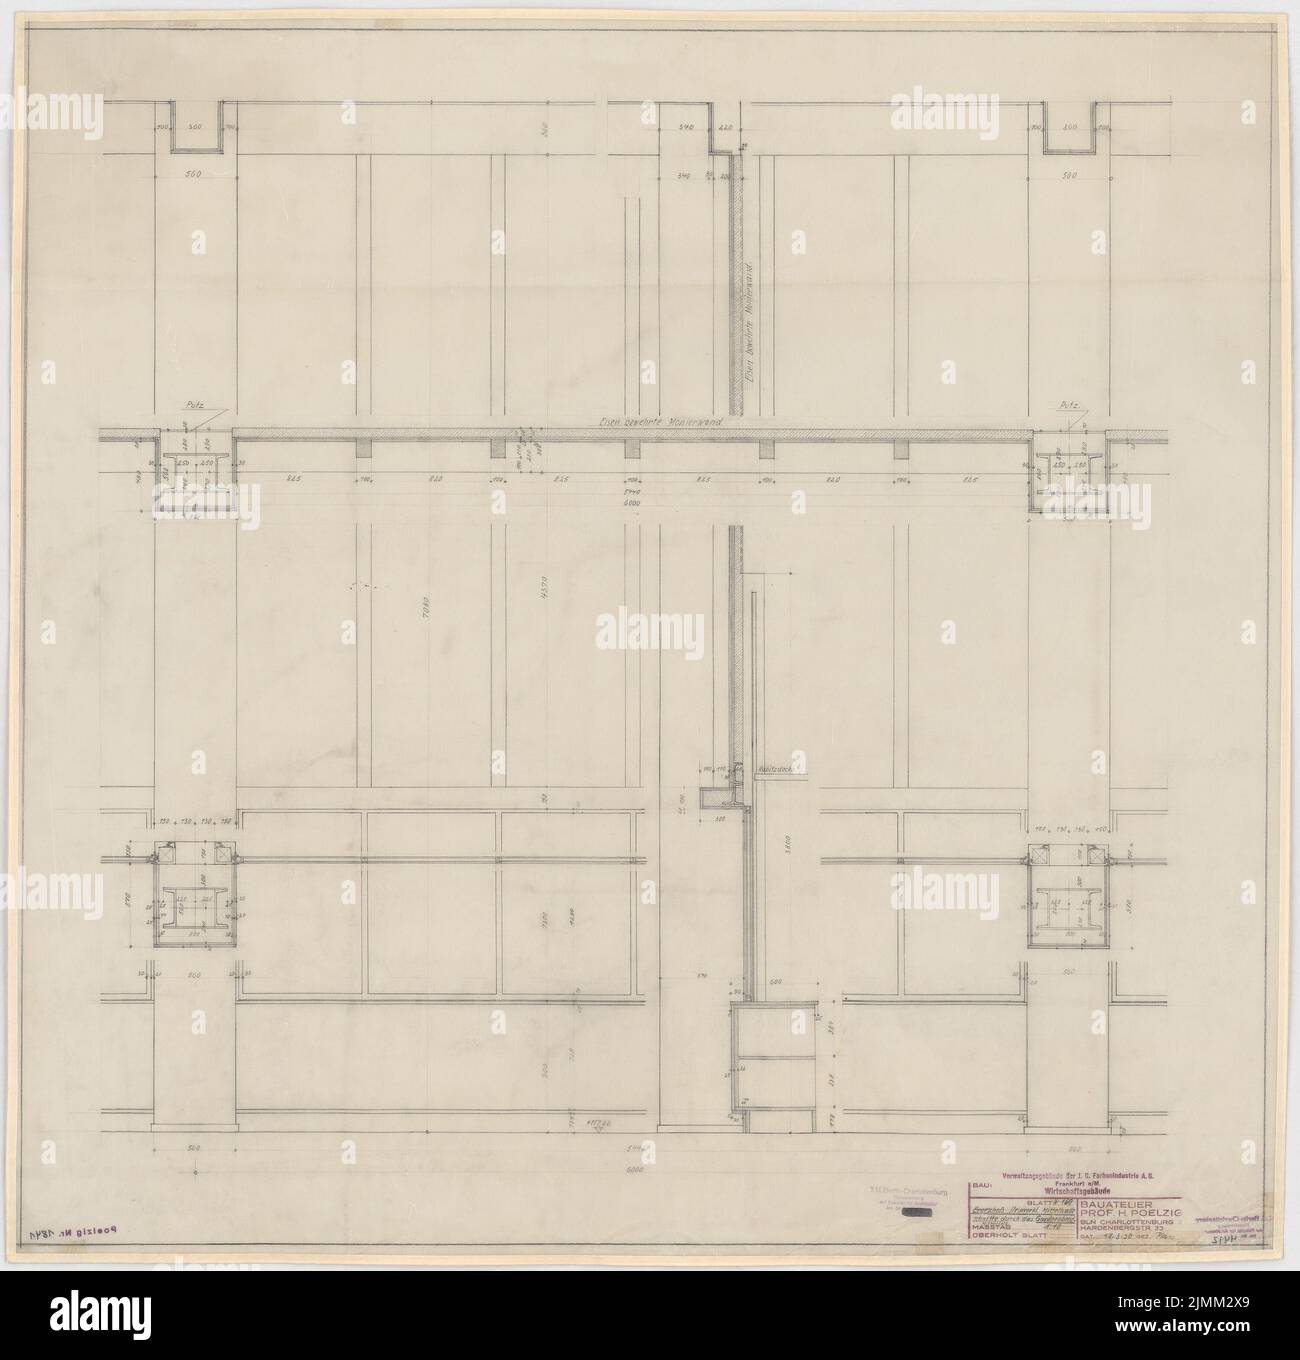 Poelzig Hans (1869-1936), I.G.-colors in Frankfurt/Main. Administration building (March 18, 1930): End floor: Earth floor stone cladding Middle Hall, cut through the cloakroom window 1:10. Pencil on transparent, 87.2 x 89.2 cm (including scan edges) Stock Photo